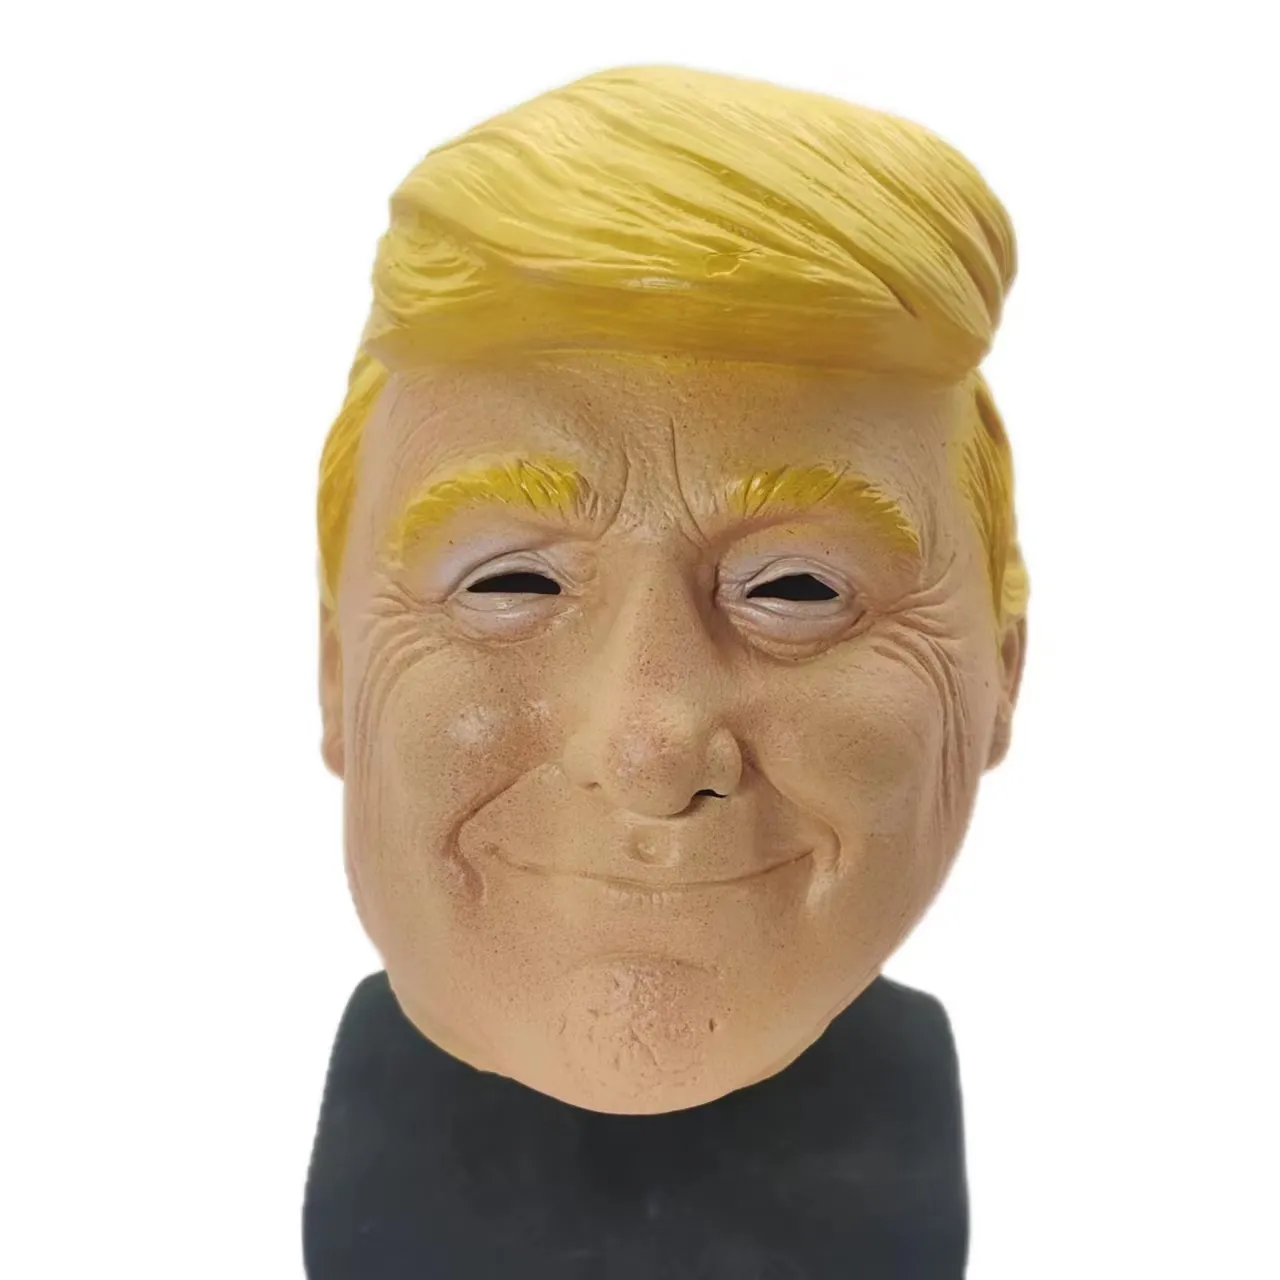 Manufacturer directly supplies the new character mask of President Trump of the United States Halloween Trump latex headdress